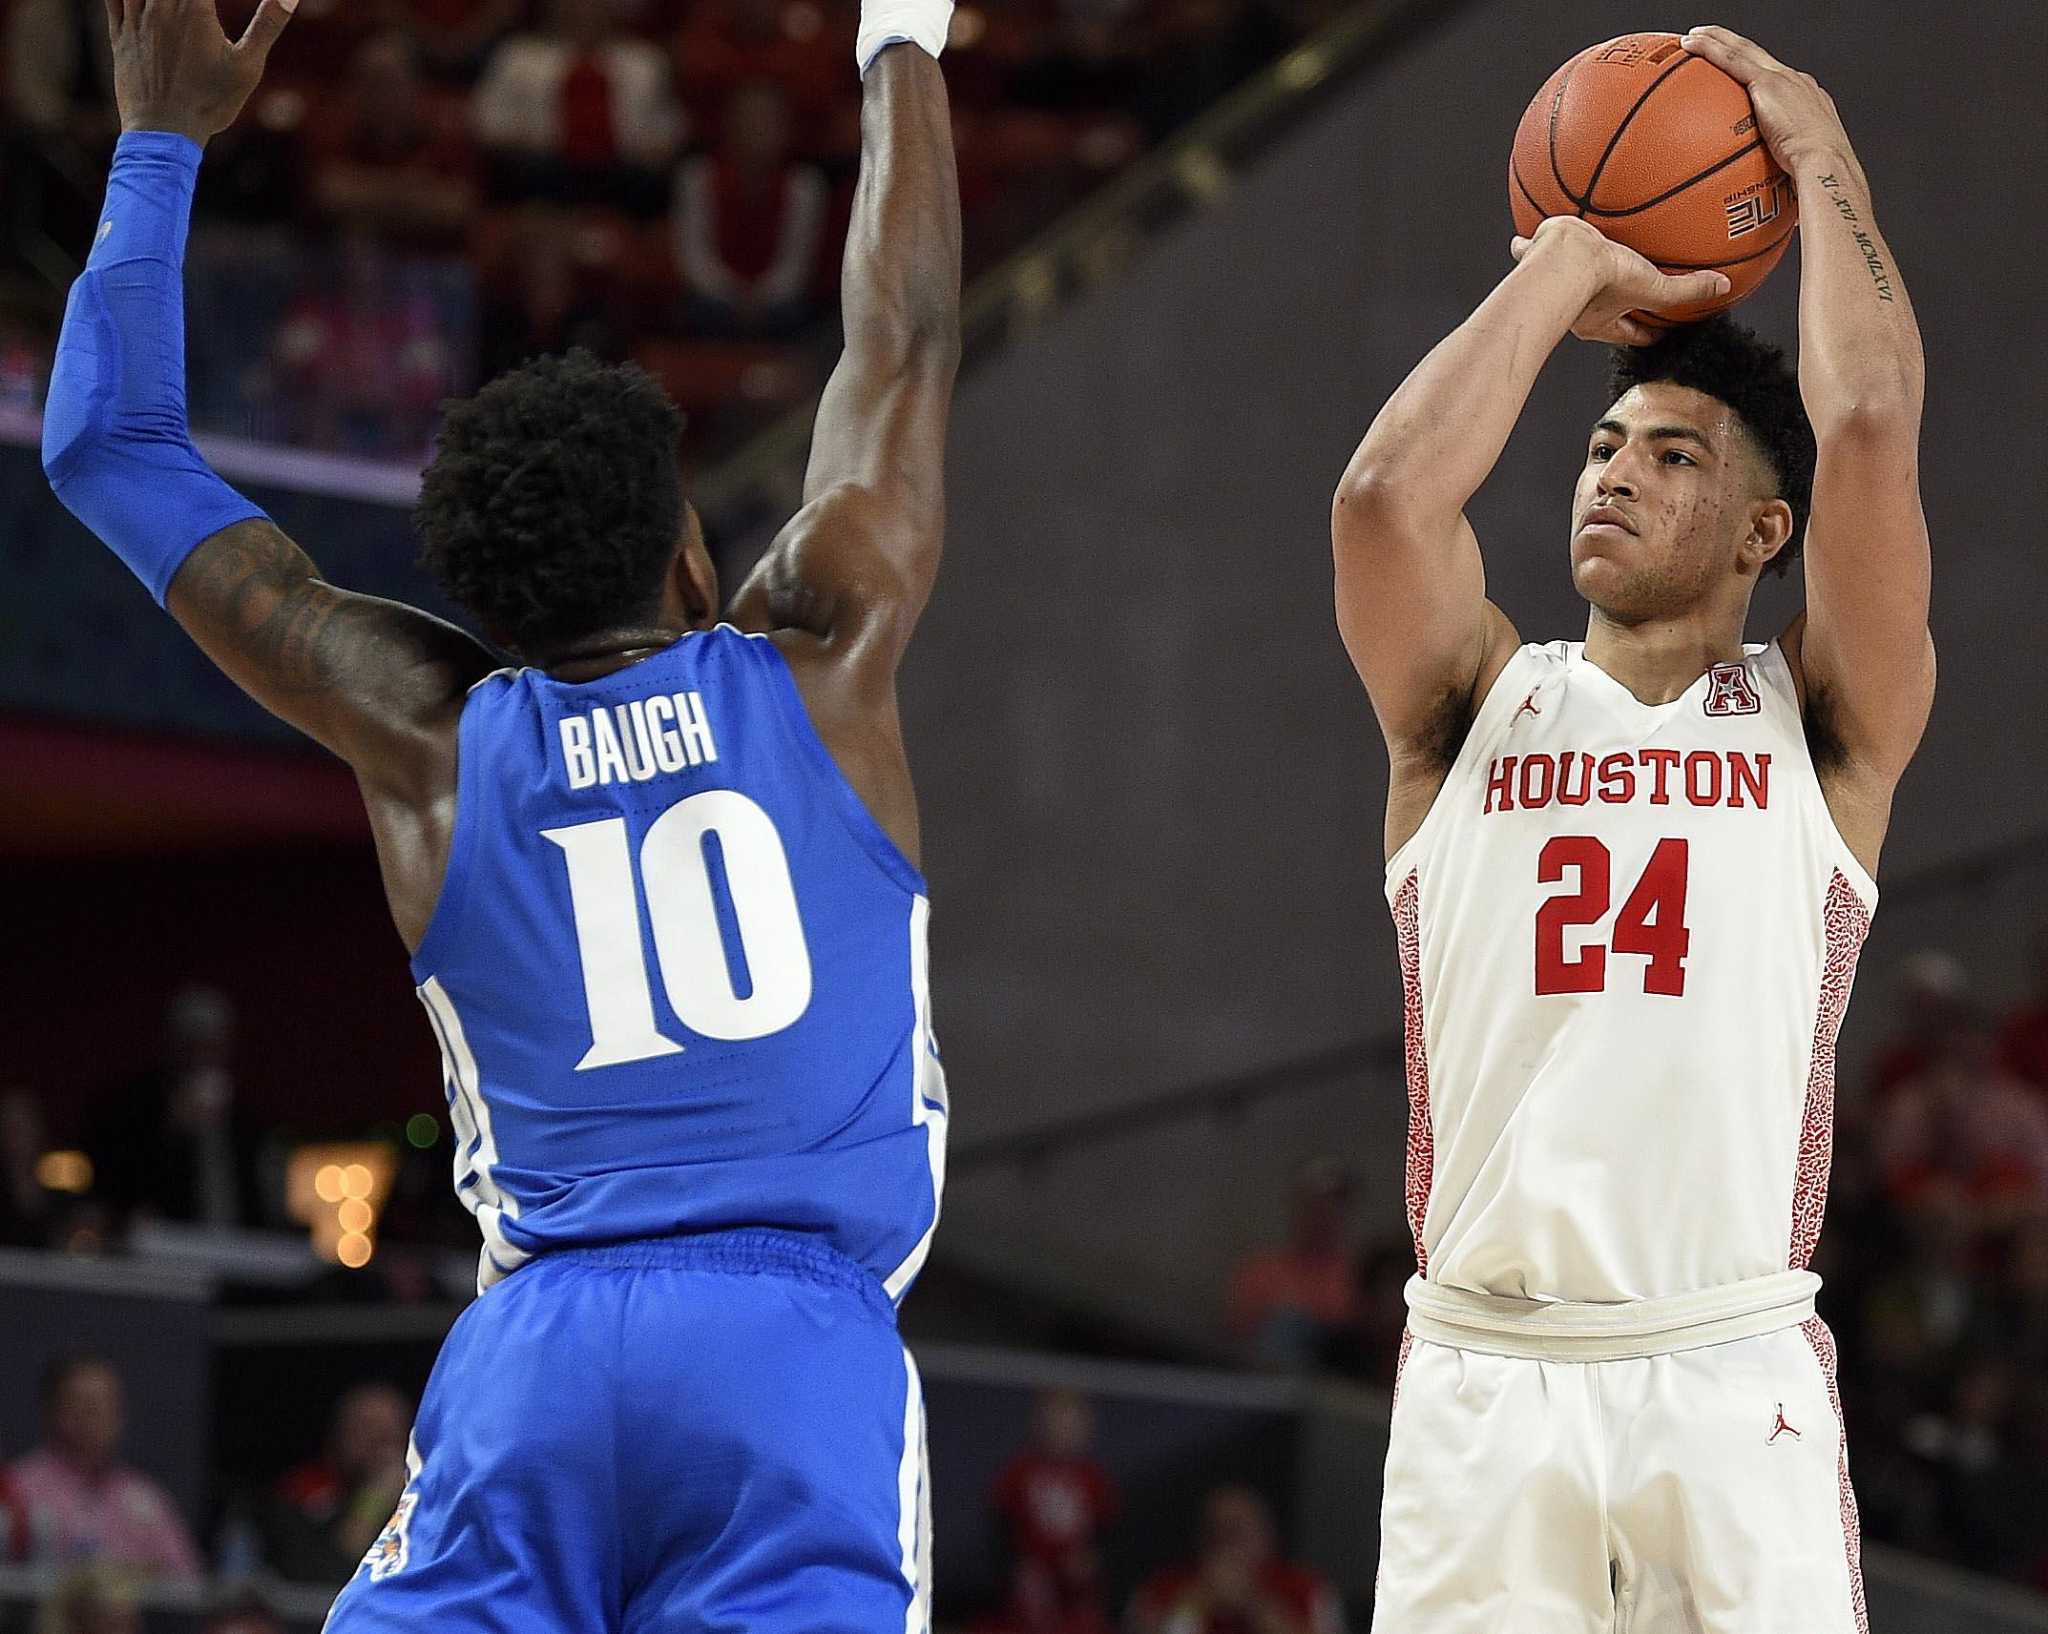 Quentin Grimes to Knicks in 2021 NBA Draft first round